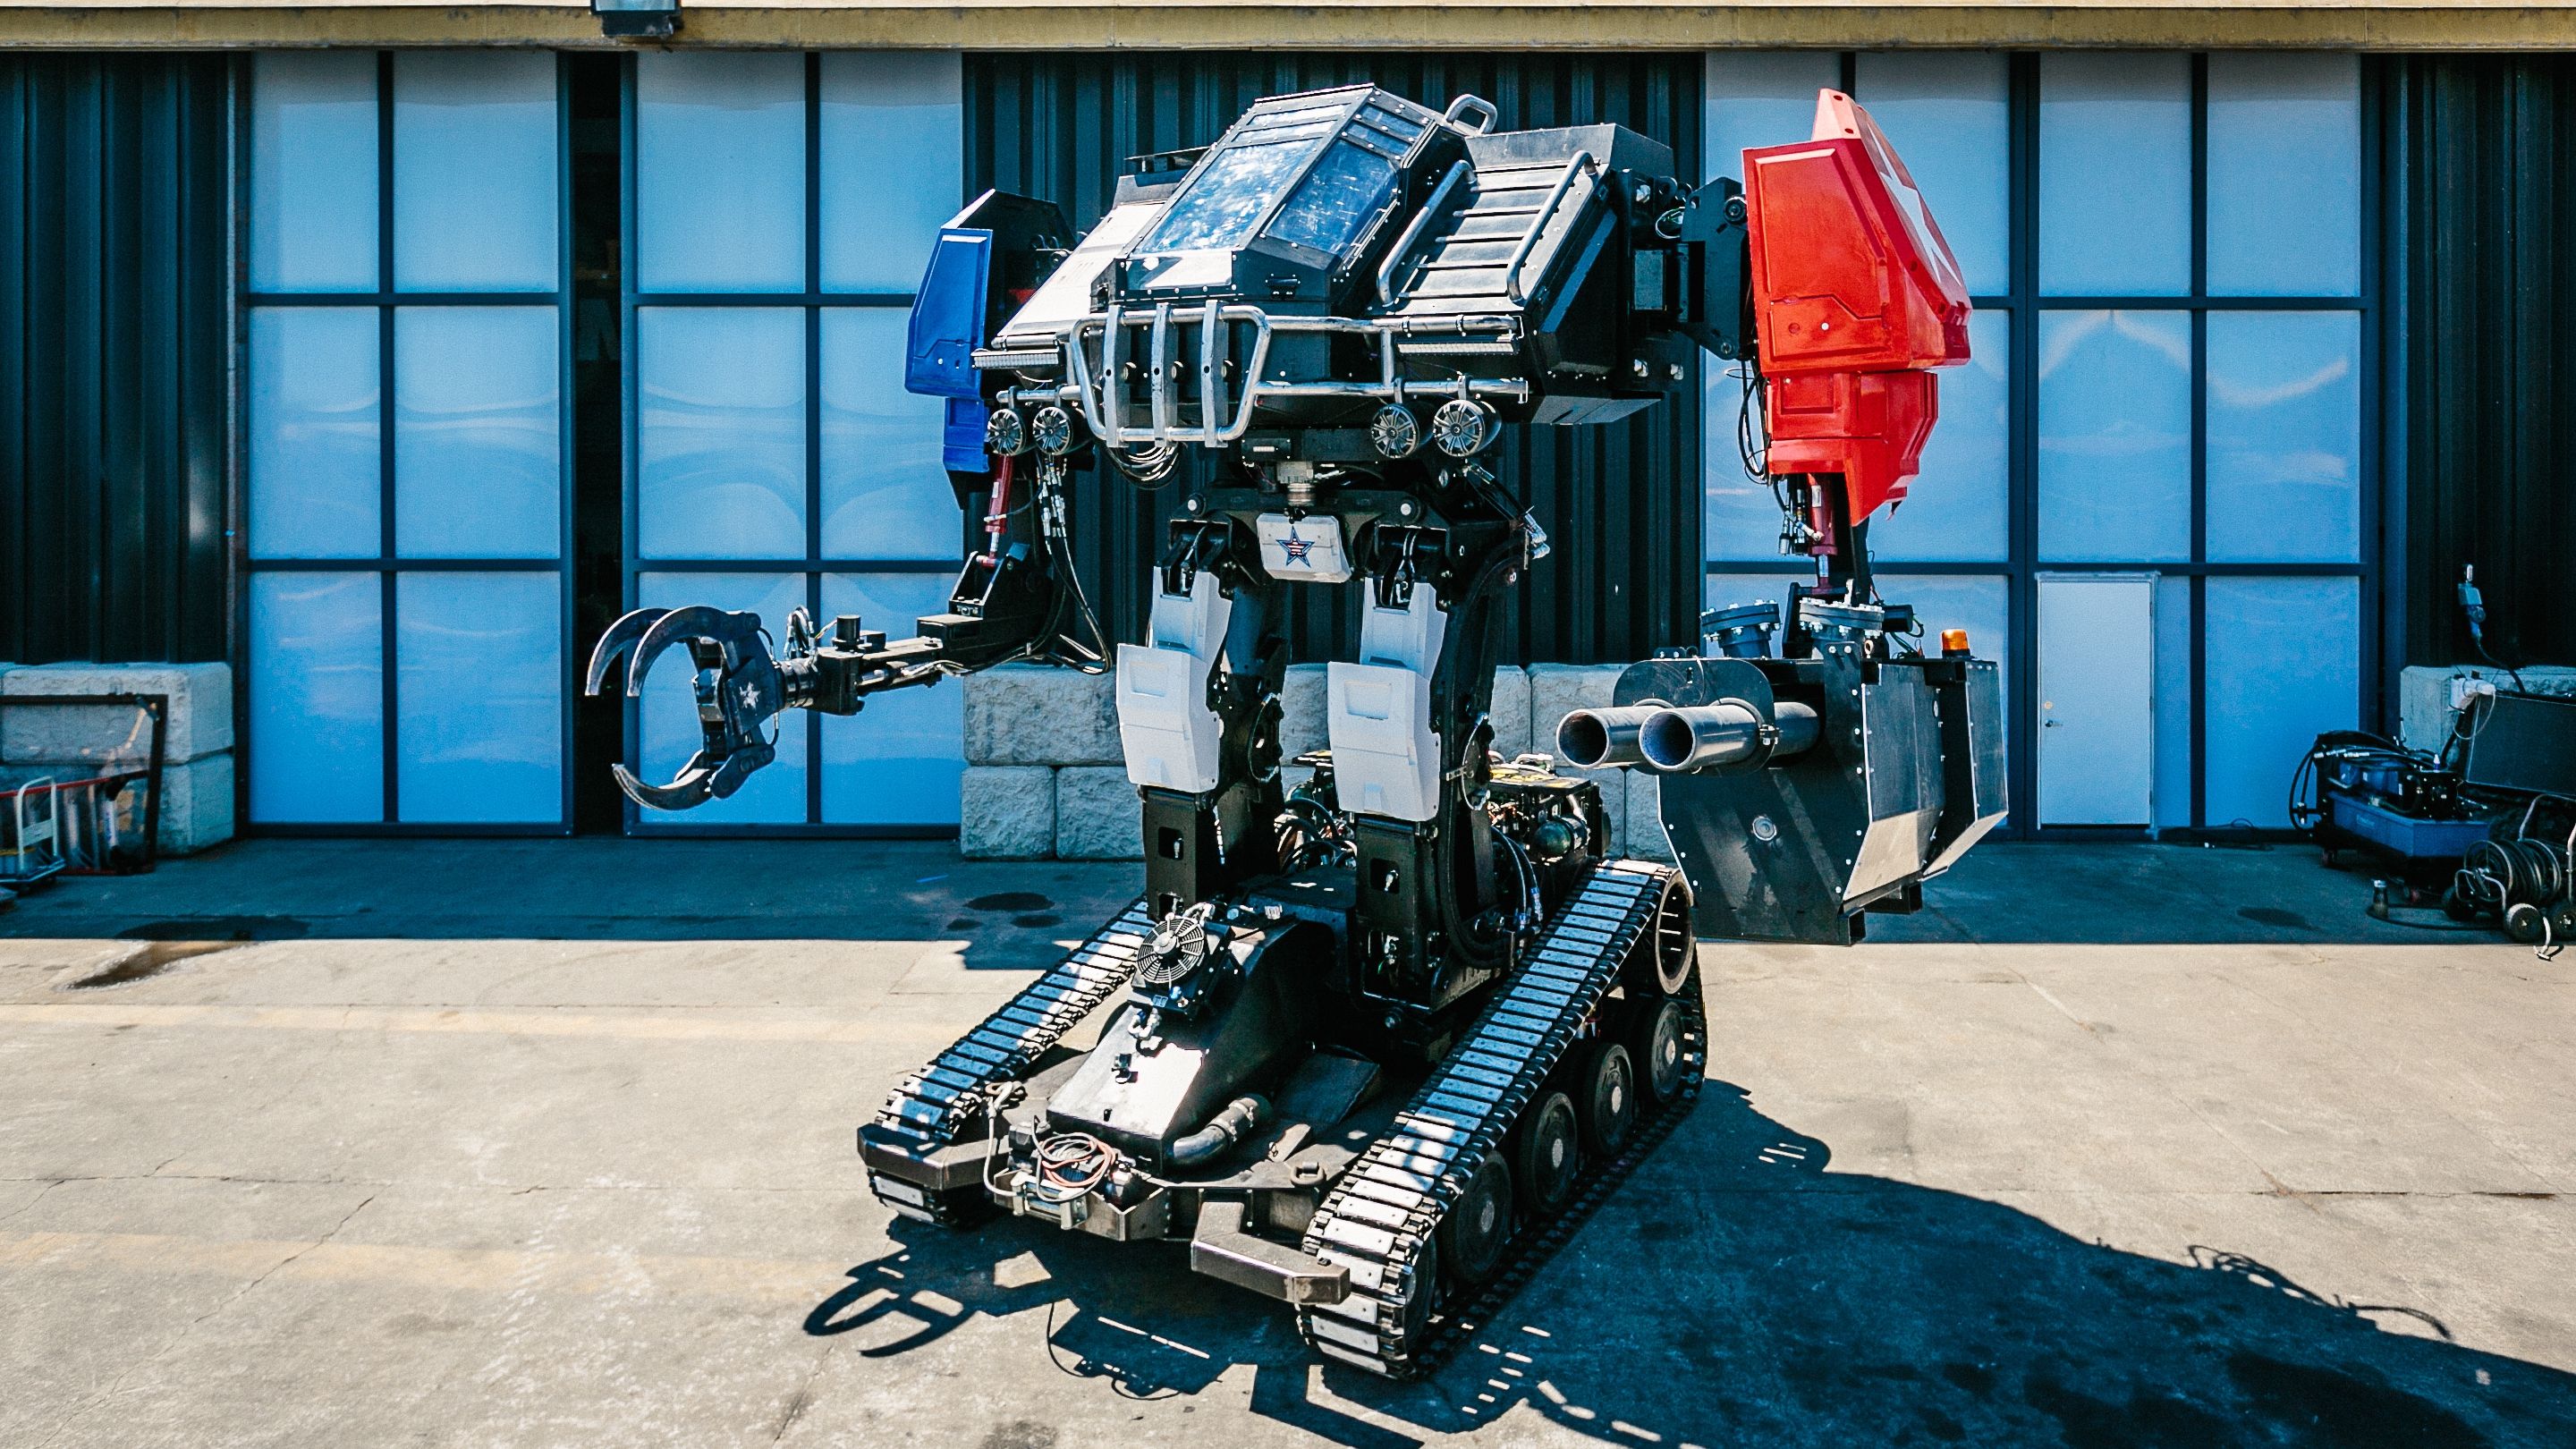 Giant robot fight organizers say they want giant robot fighting